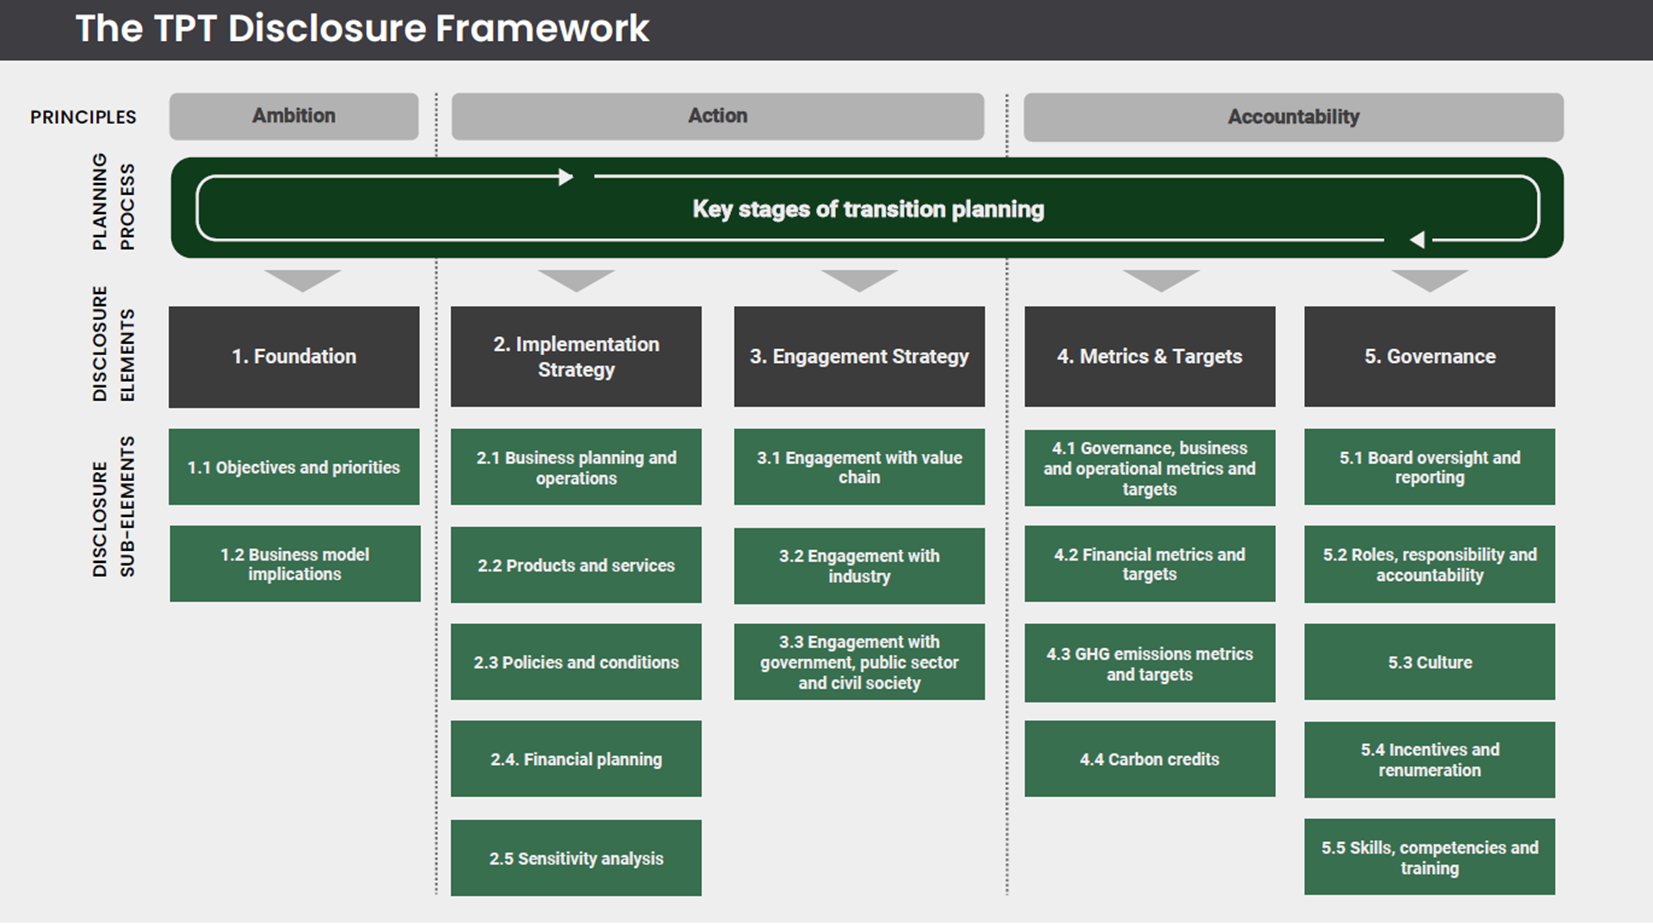 Infographic of the TPT disclosure framework showing principles, planning process, disclosure elements and disclosure sub-elements